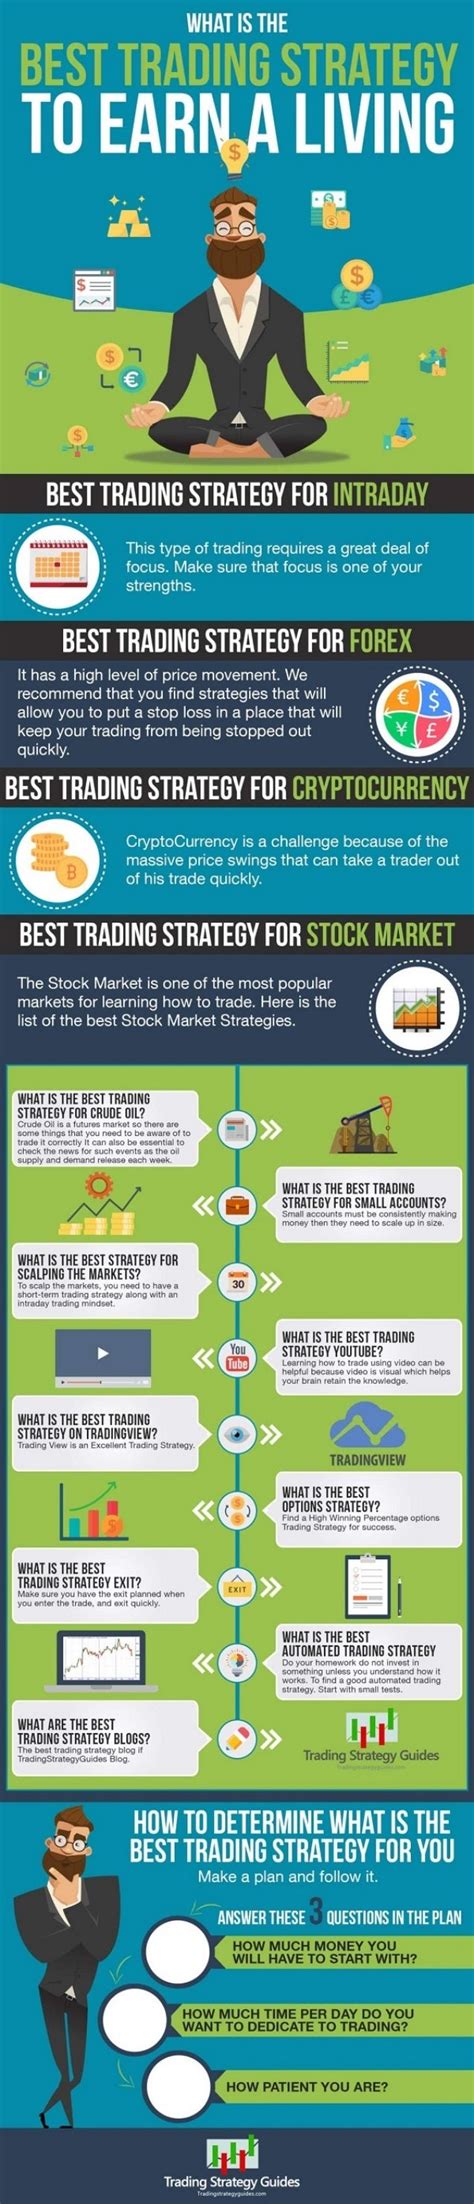 The Top 30 Best Trading Strategies Infographic